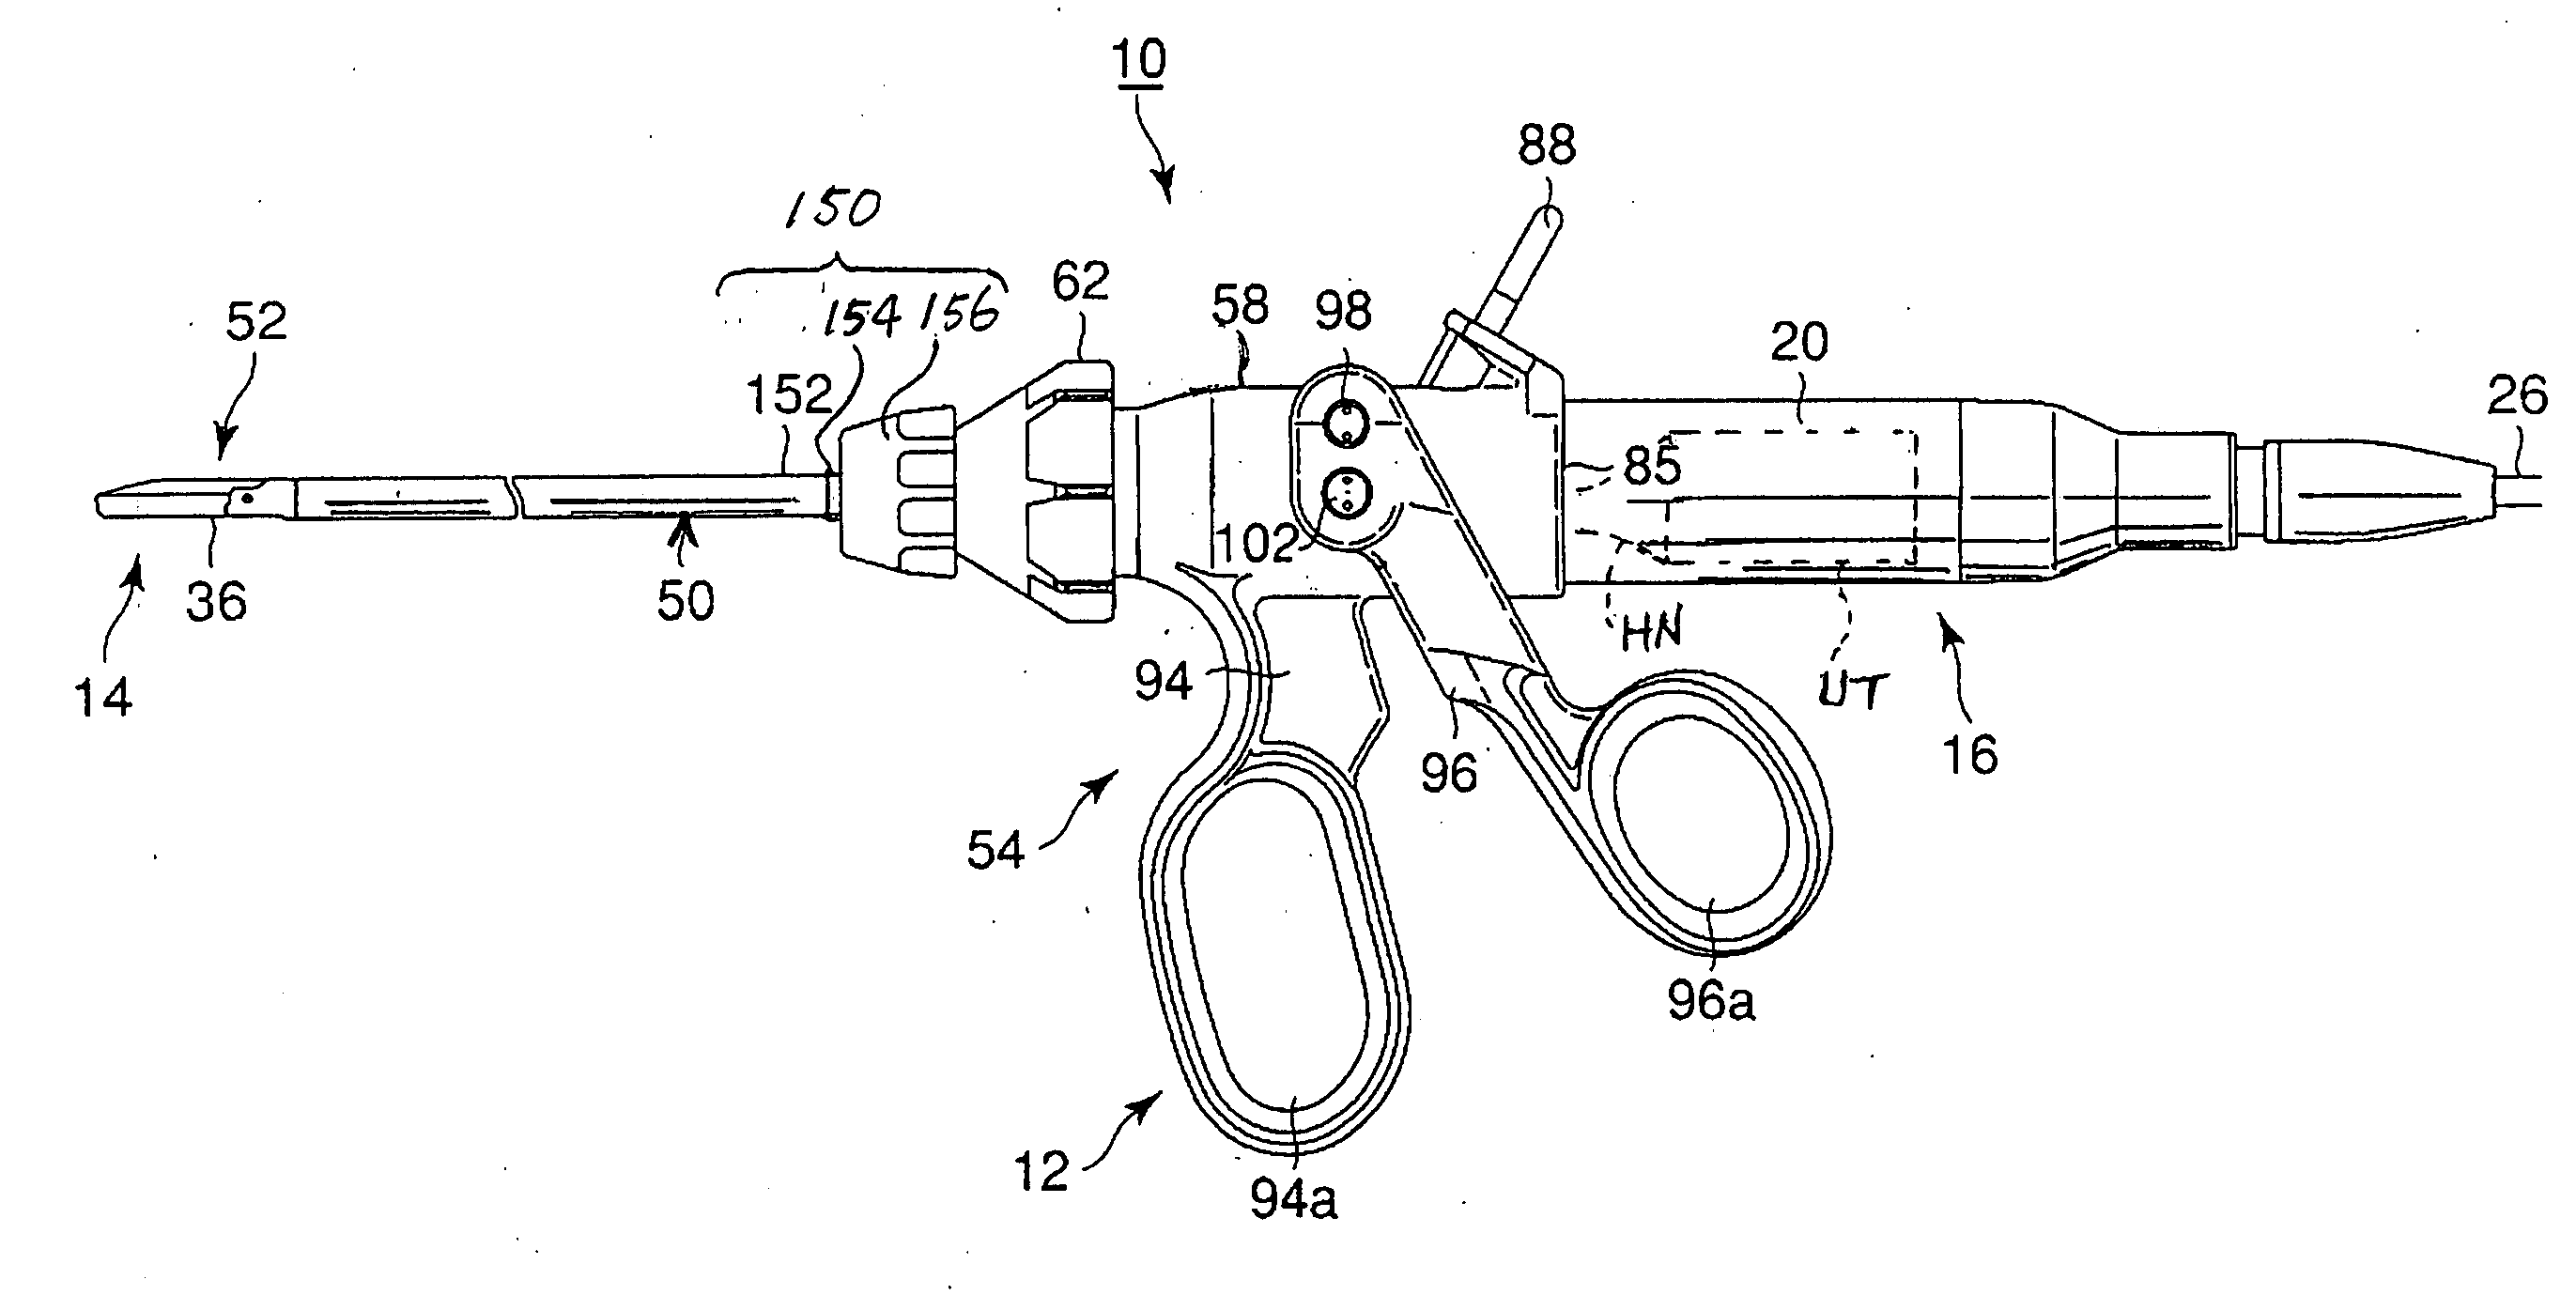 Treatment apparatus and treatment device for surgical treatments using ultrasonic vibration